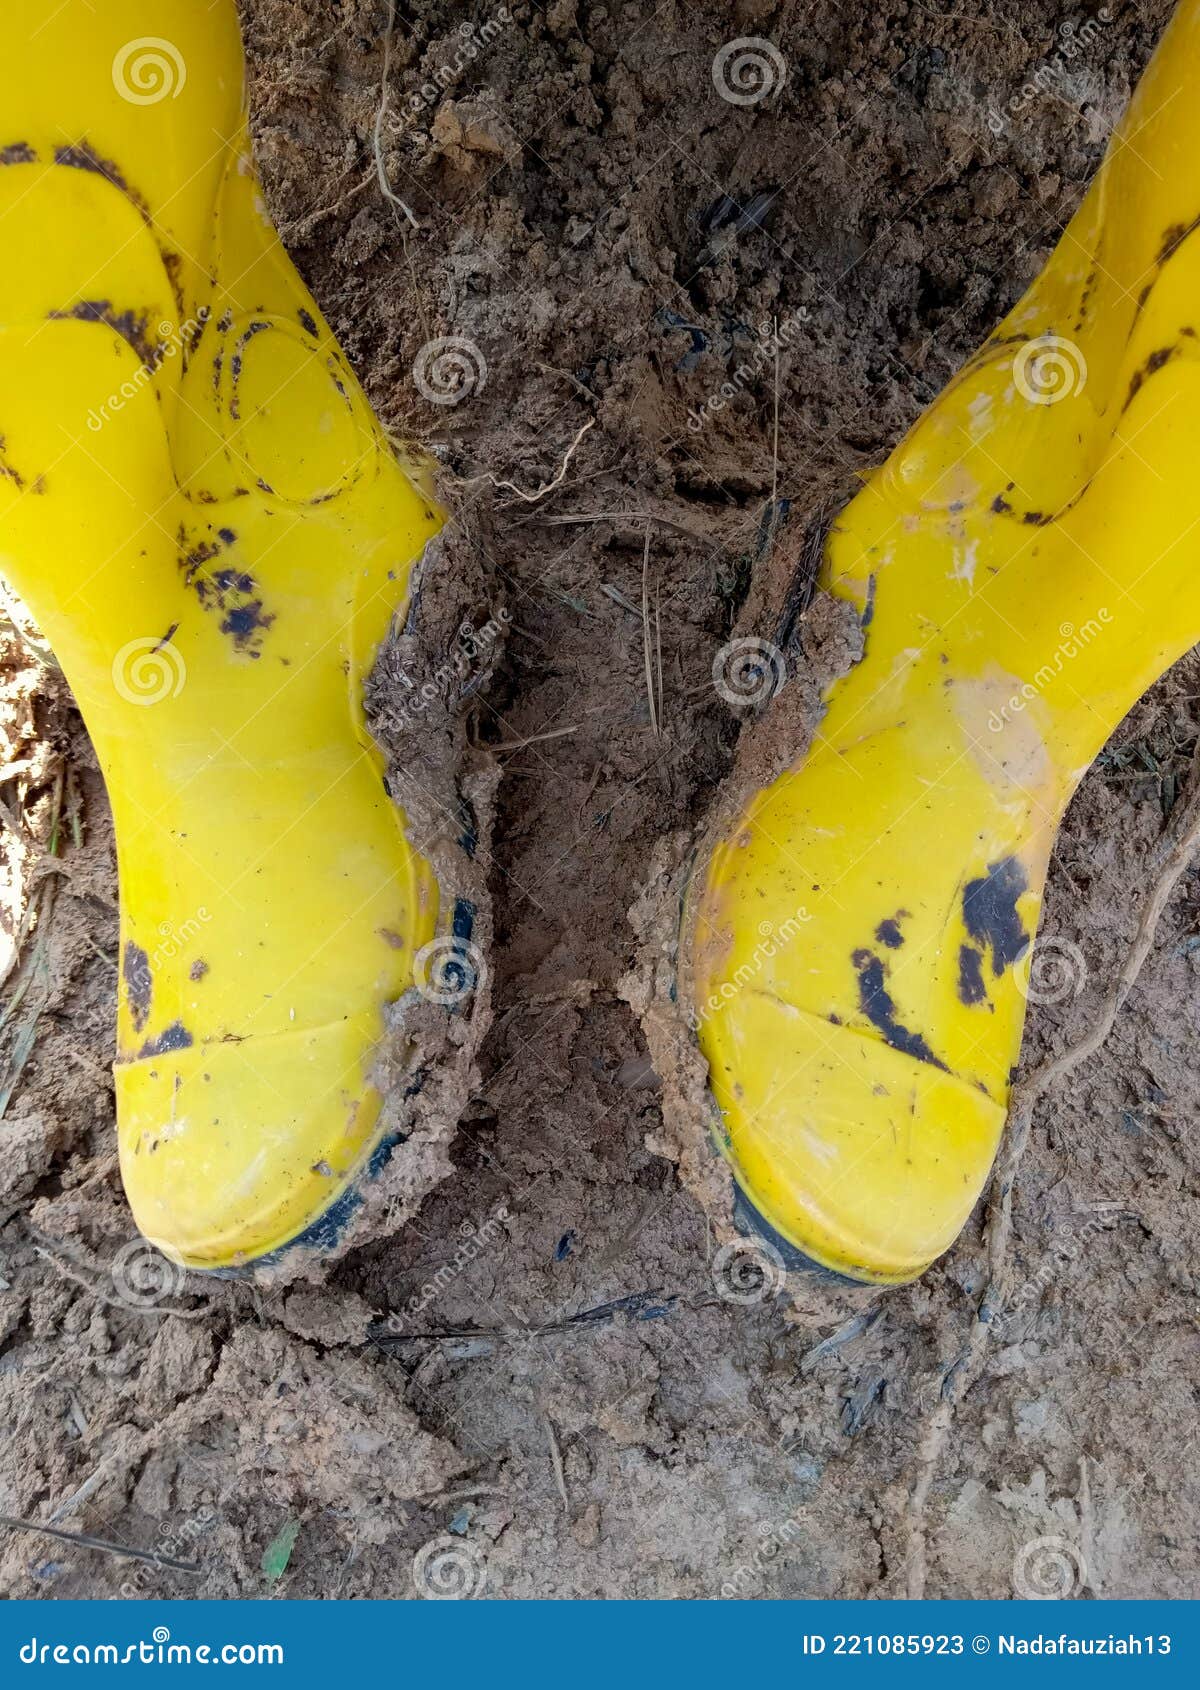 A Pair of Dirty Yellow Boots, after Being Worn for Work in the Garden ...